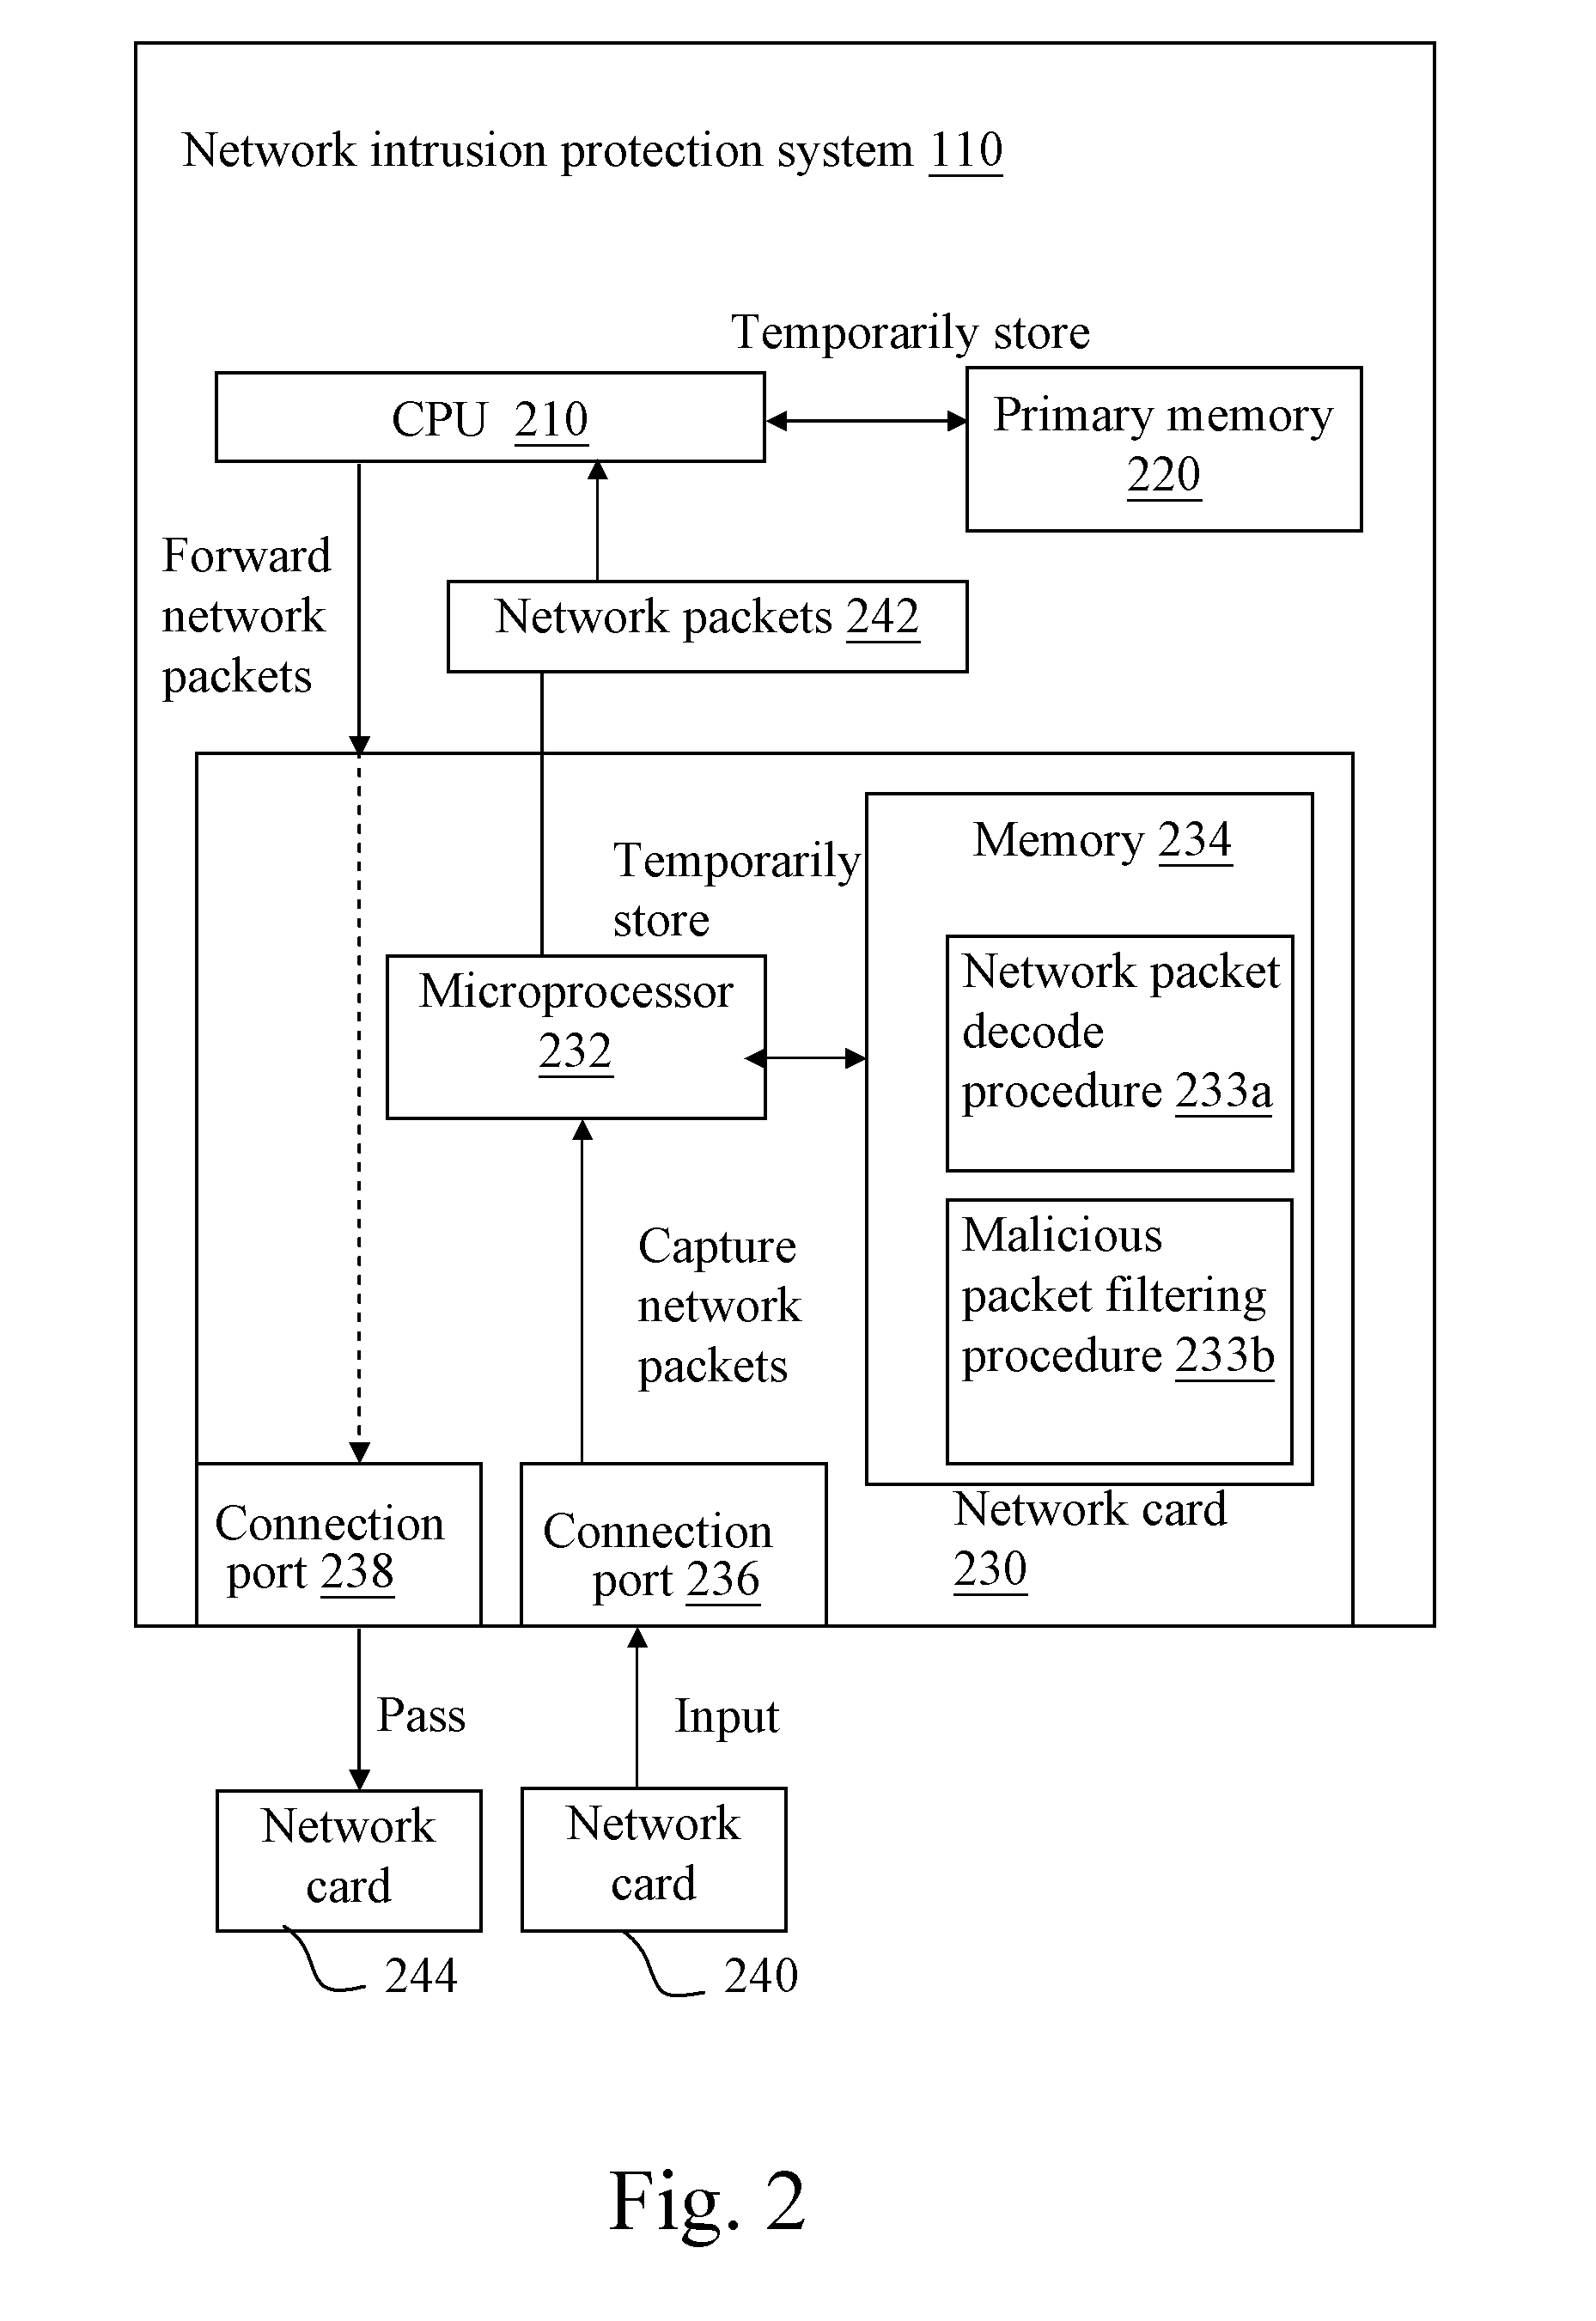 Network intrusion protection system